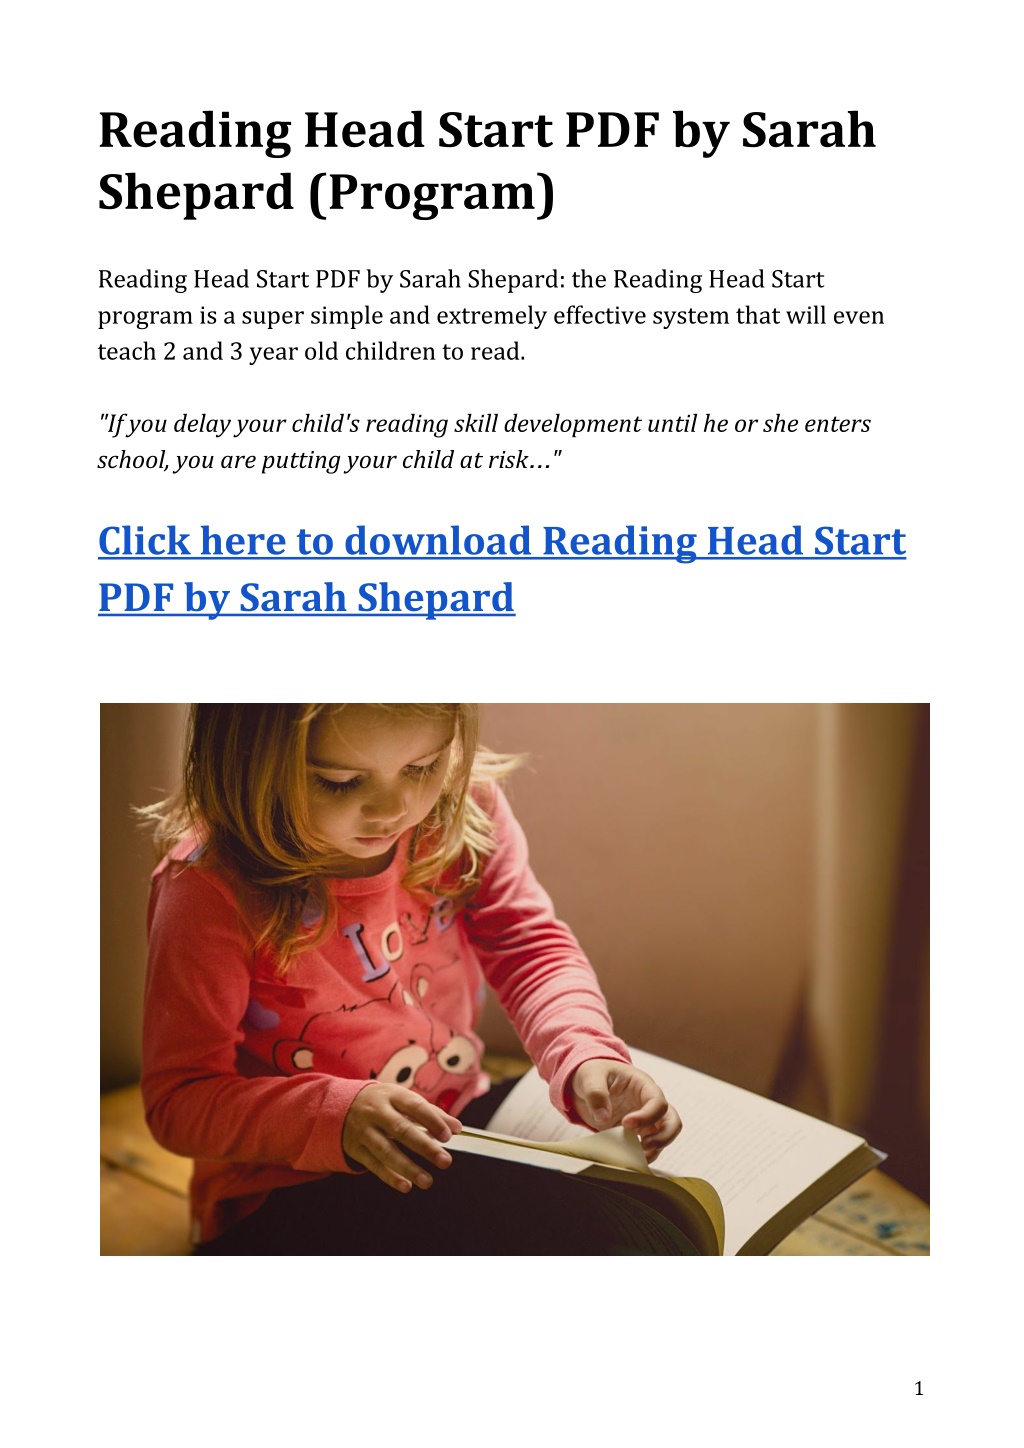 Reading Head Start Review - What You Should Know [2021]